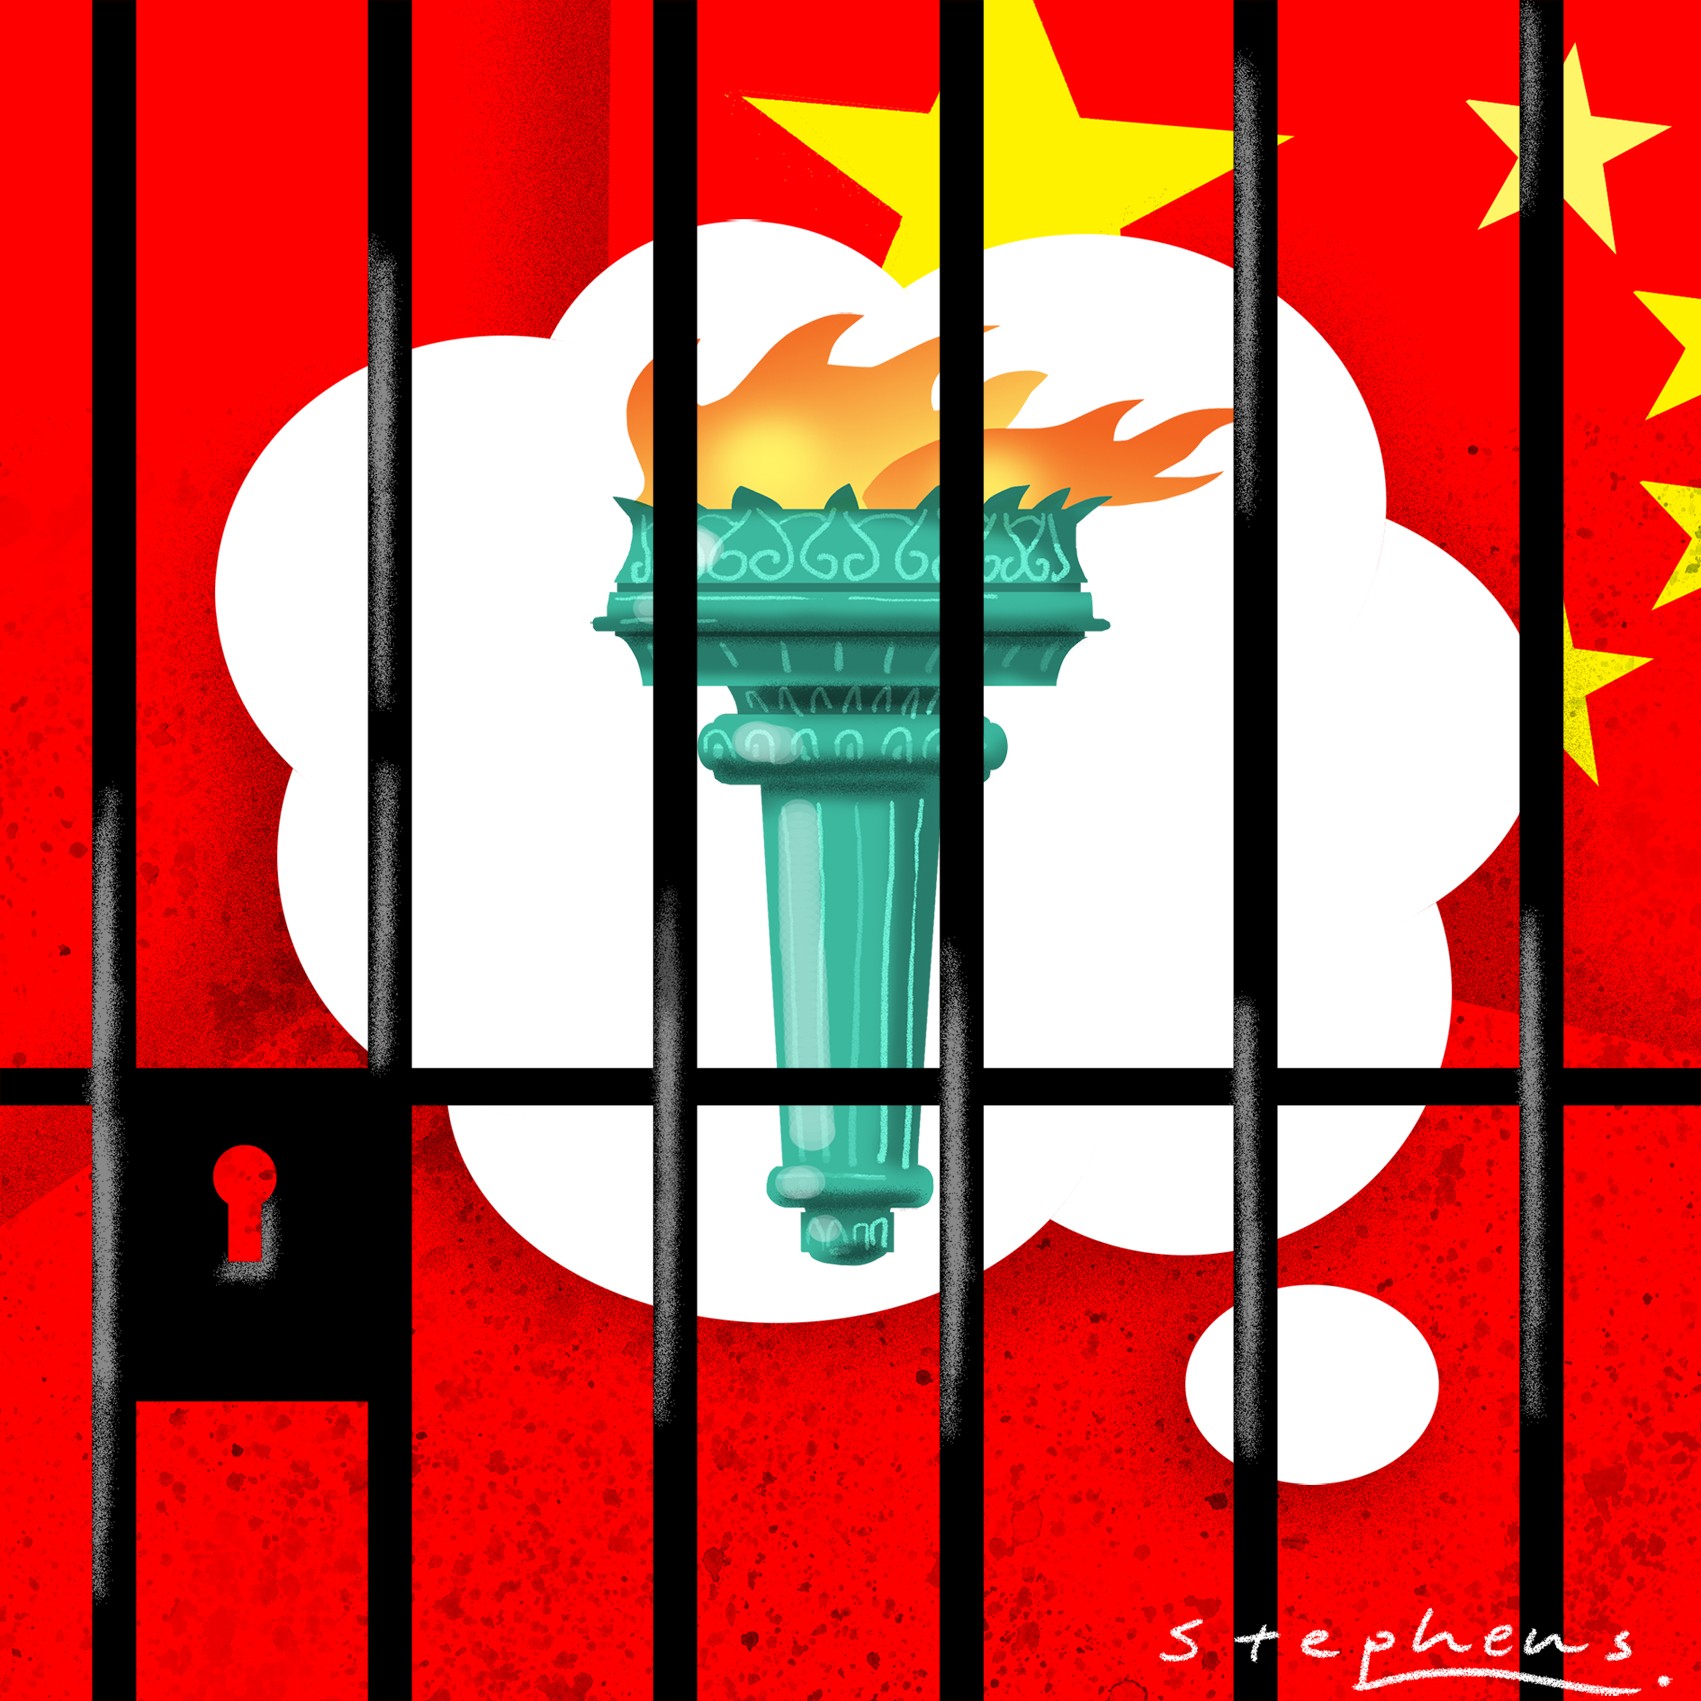 Jerome A. Cohen and Yu-Jie Chen say no matter what the eventual fate of Lee, his well-rehearsed trial and confession are meant as a reminder of the danger of attempts to ‘subvert’ the government of mainland China